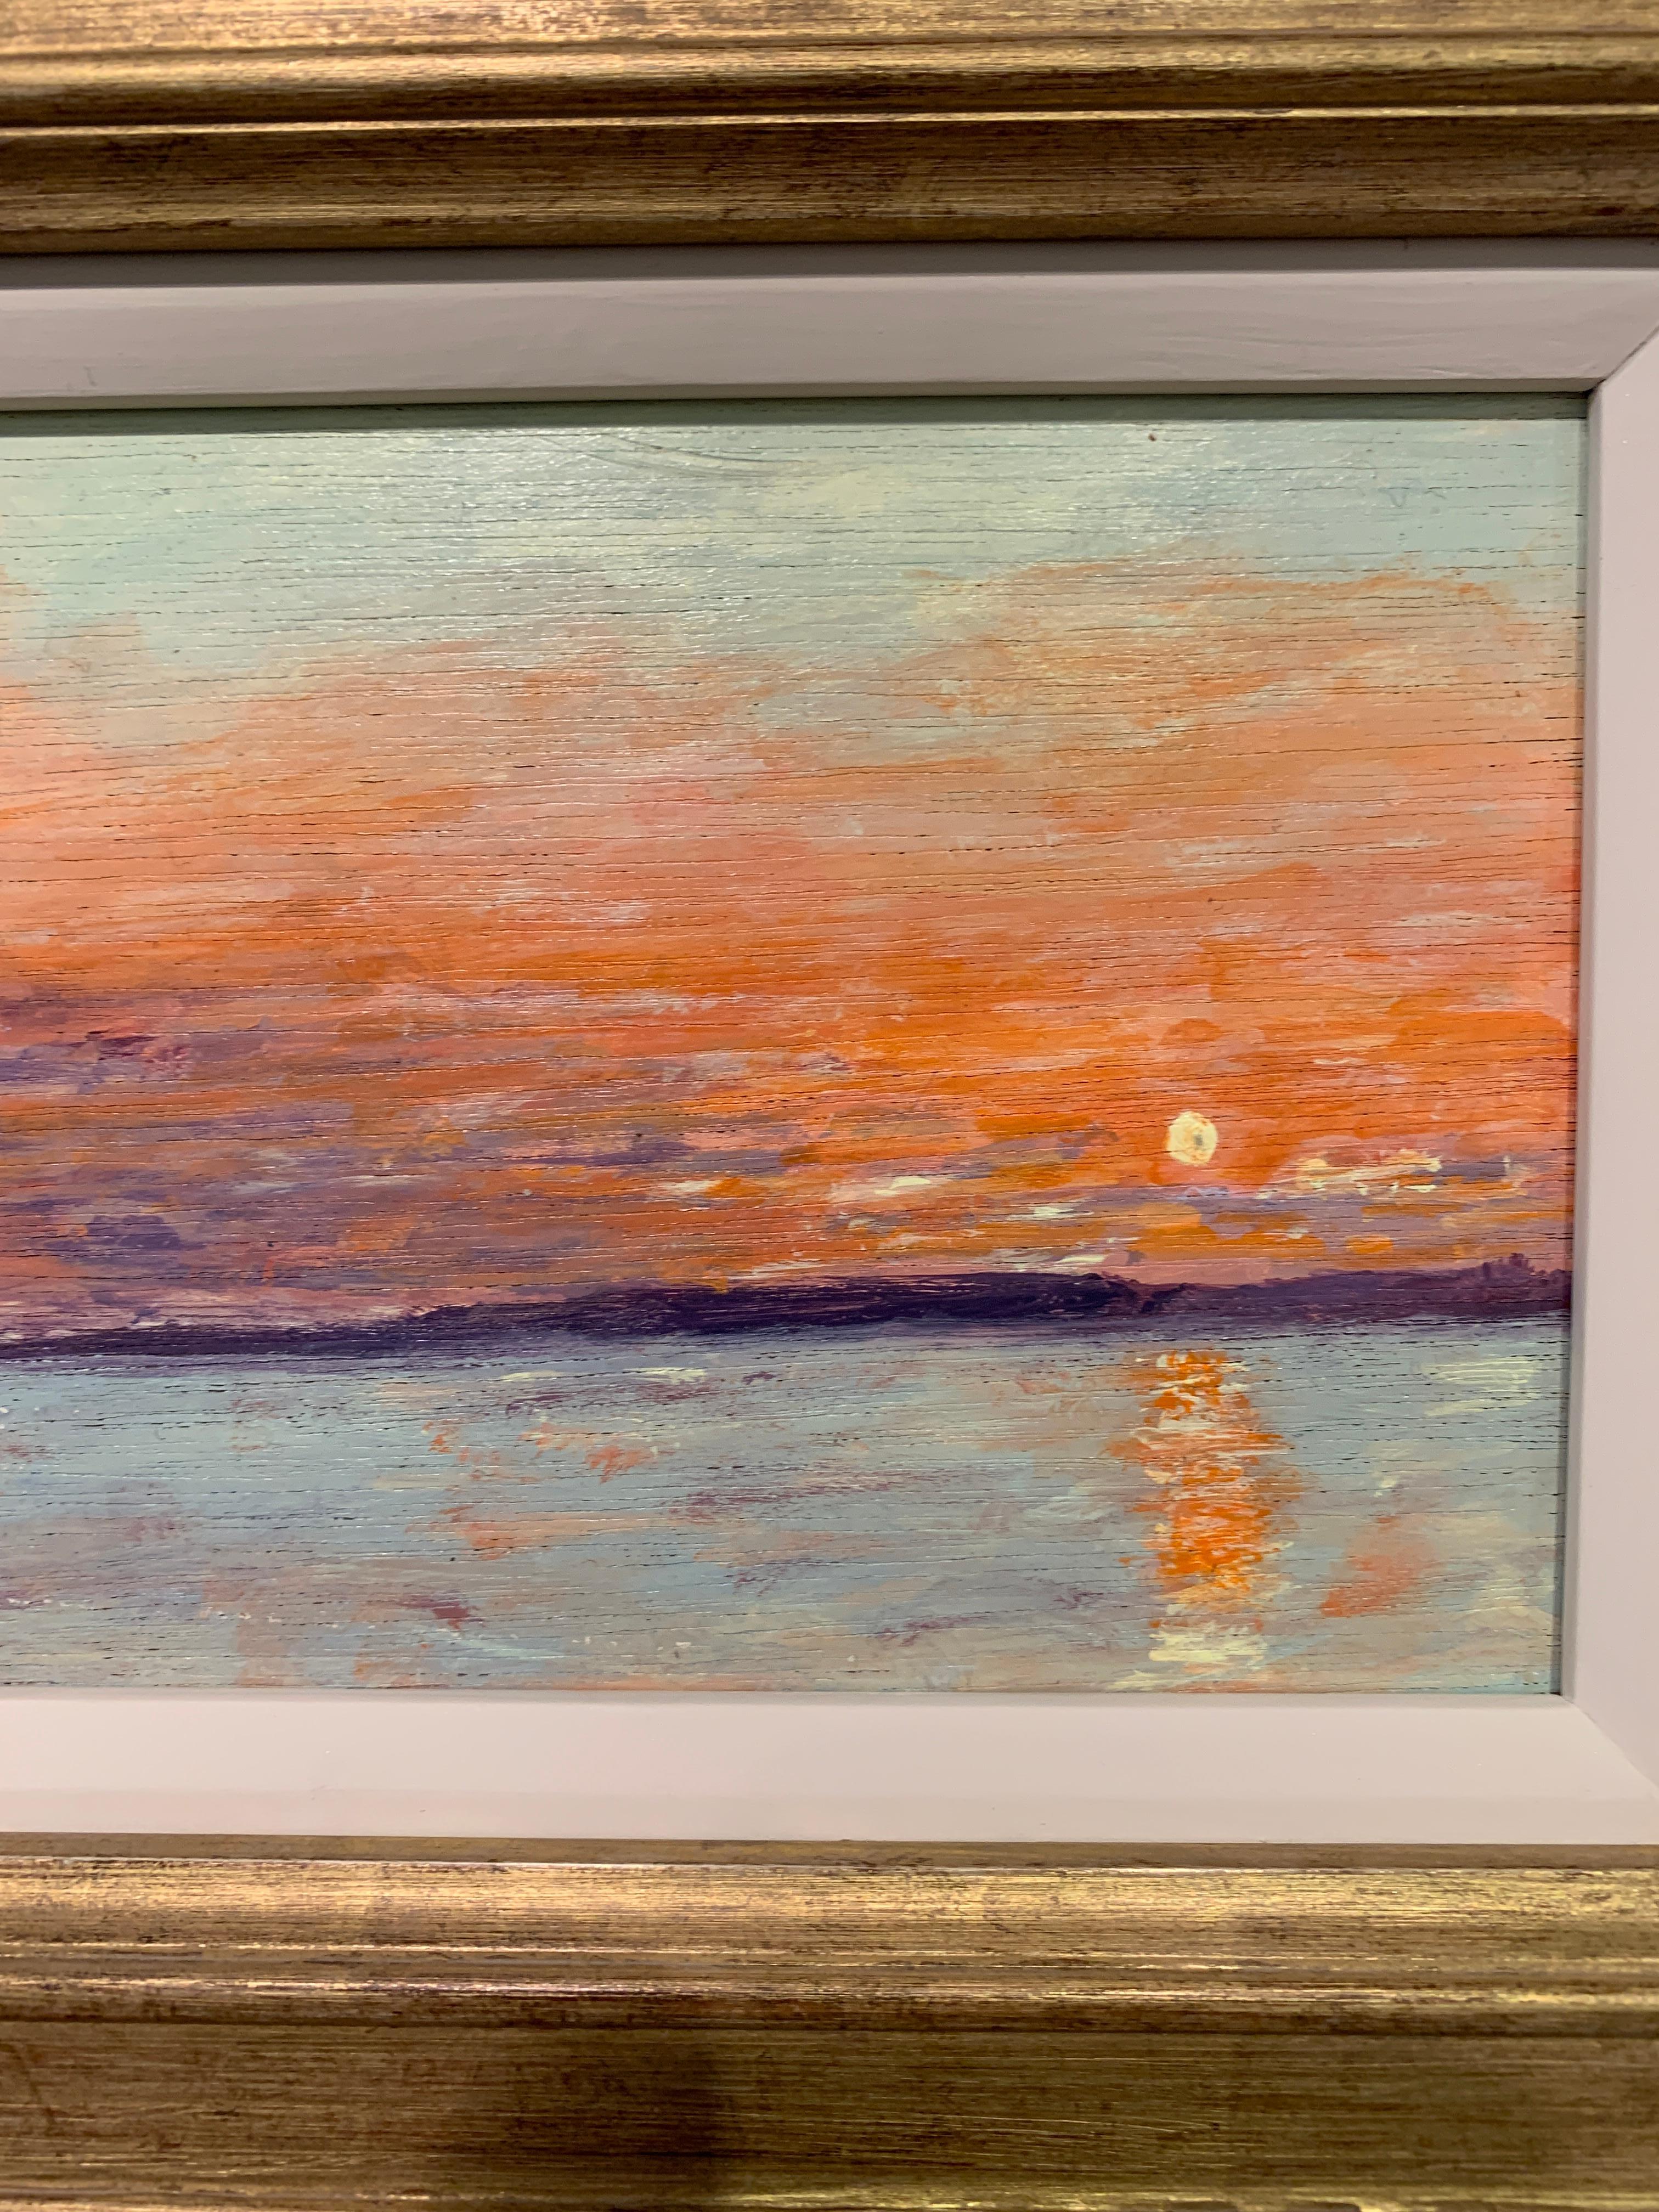 American Impressionist Setting Sun over the Ocean off the coast of Nantucket - Painting by Charles Bertie Hall